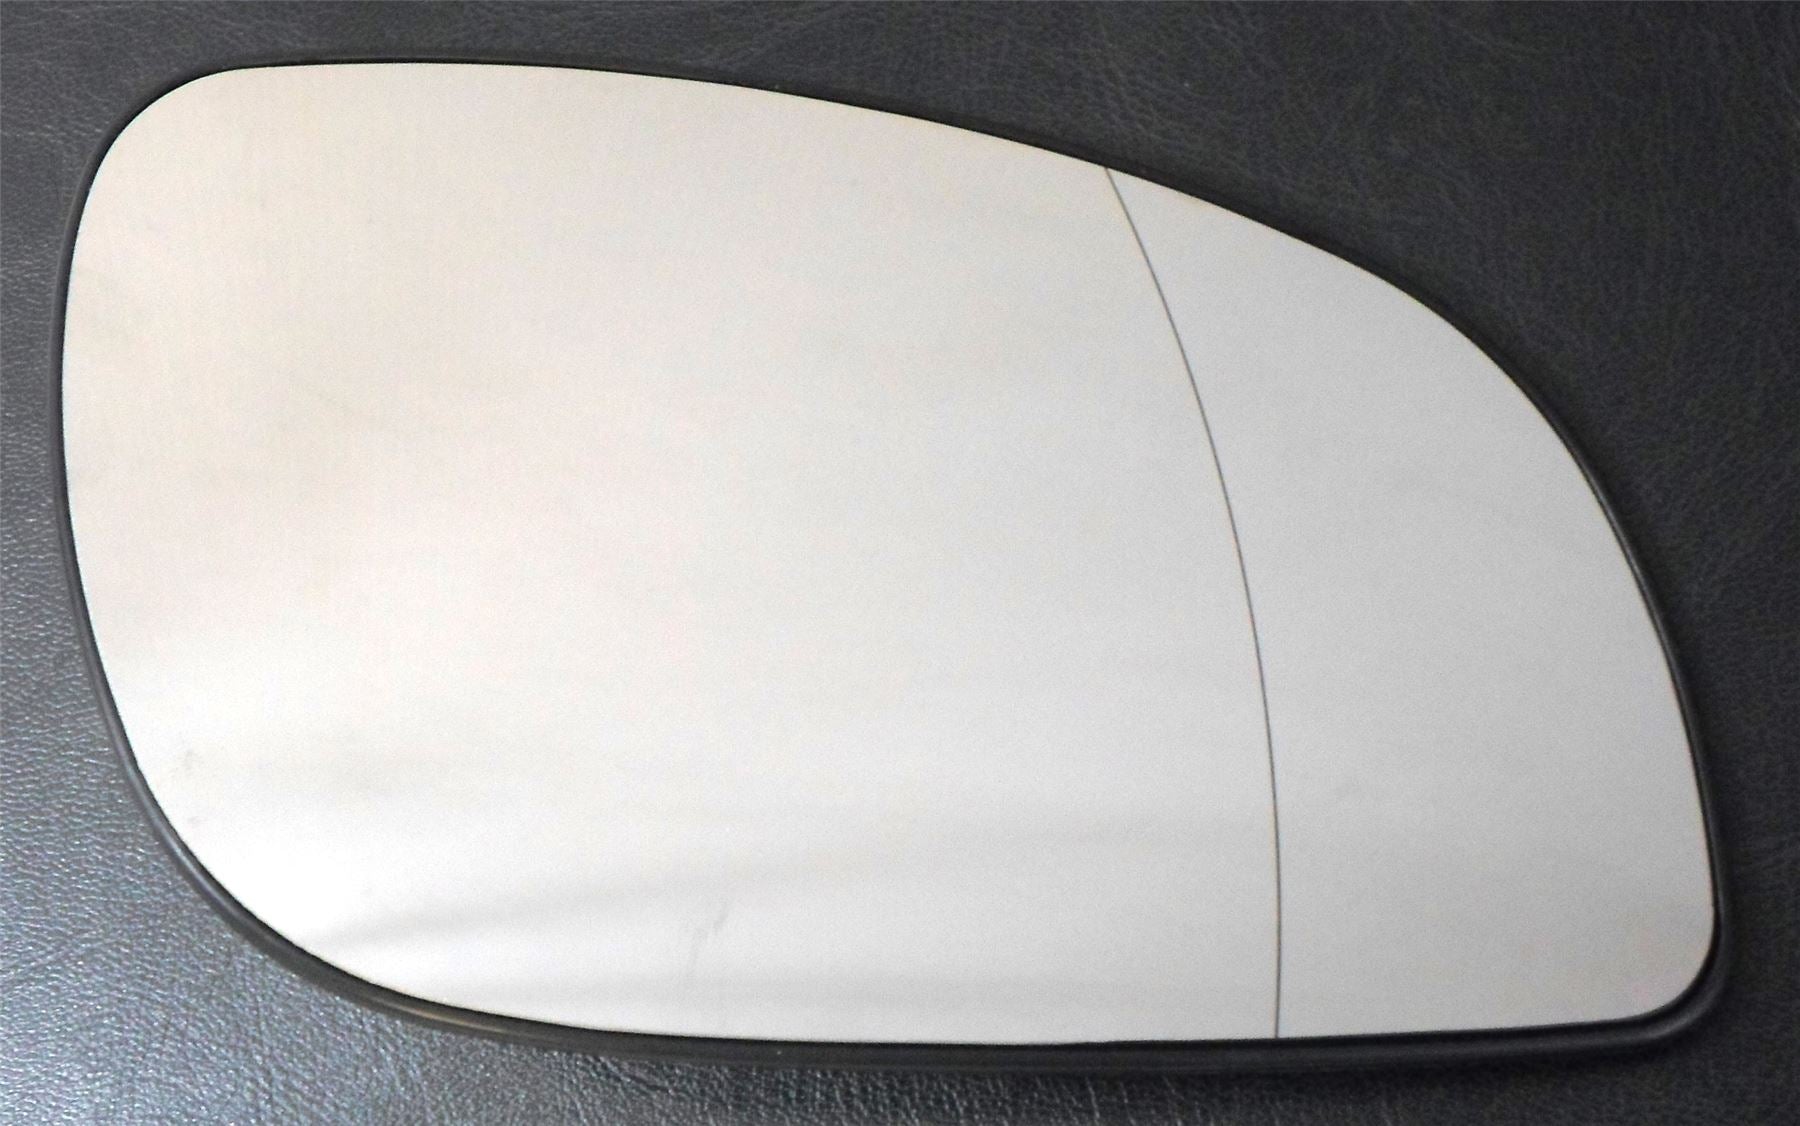 Vauxhall Vectra Mk.2 2003-2008 Heated Convex Mirror Glass Drivers Side O/S